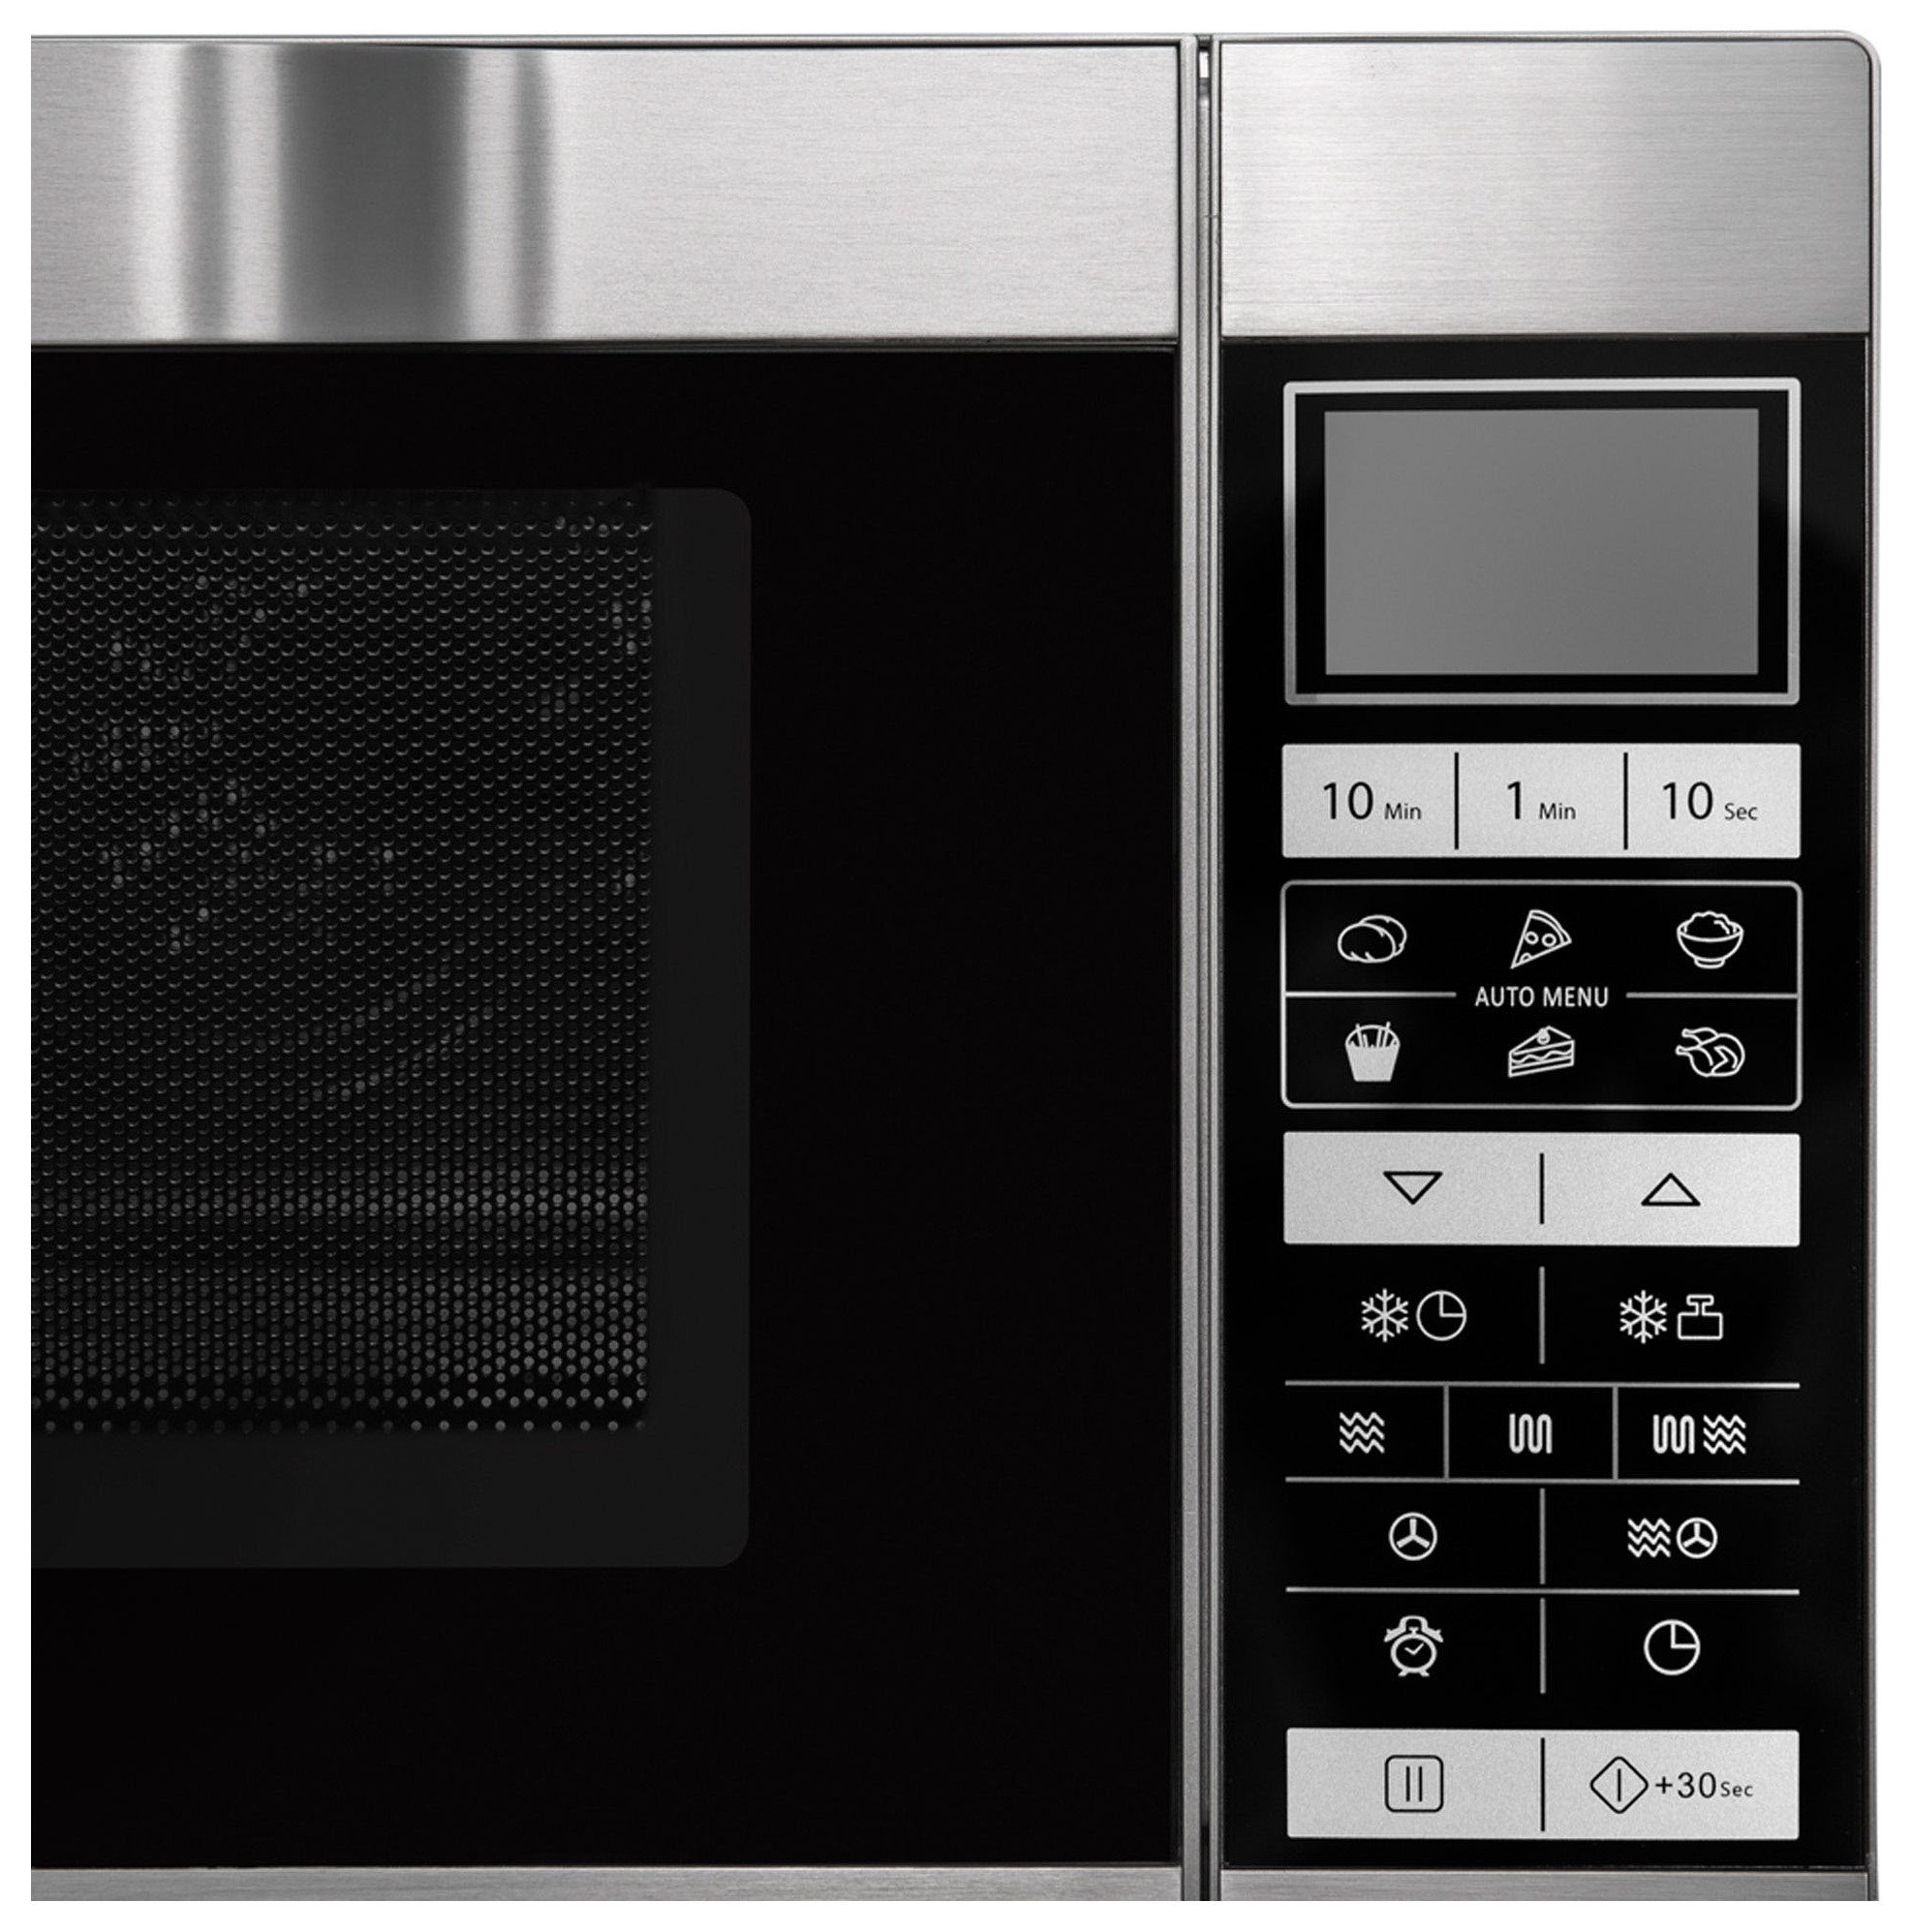 Sharp 900W Combination Flatbed Microwave R861 Review